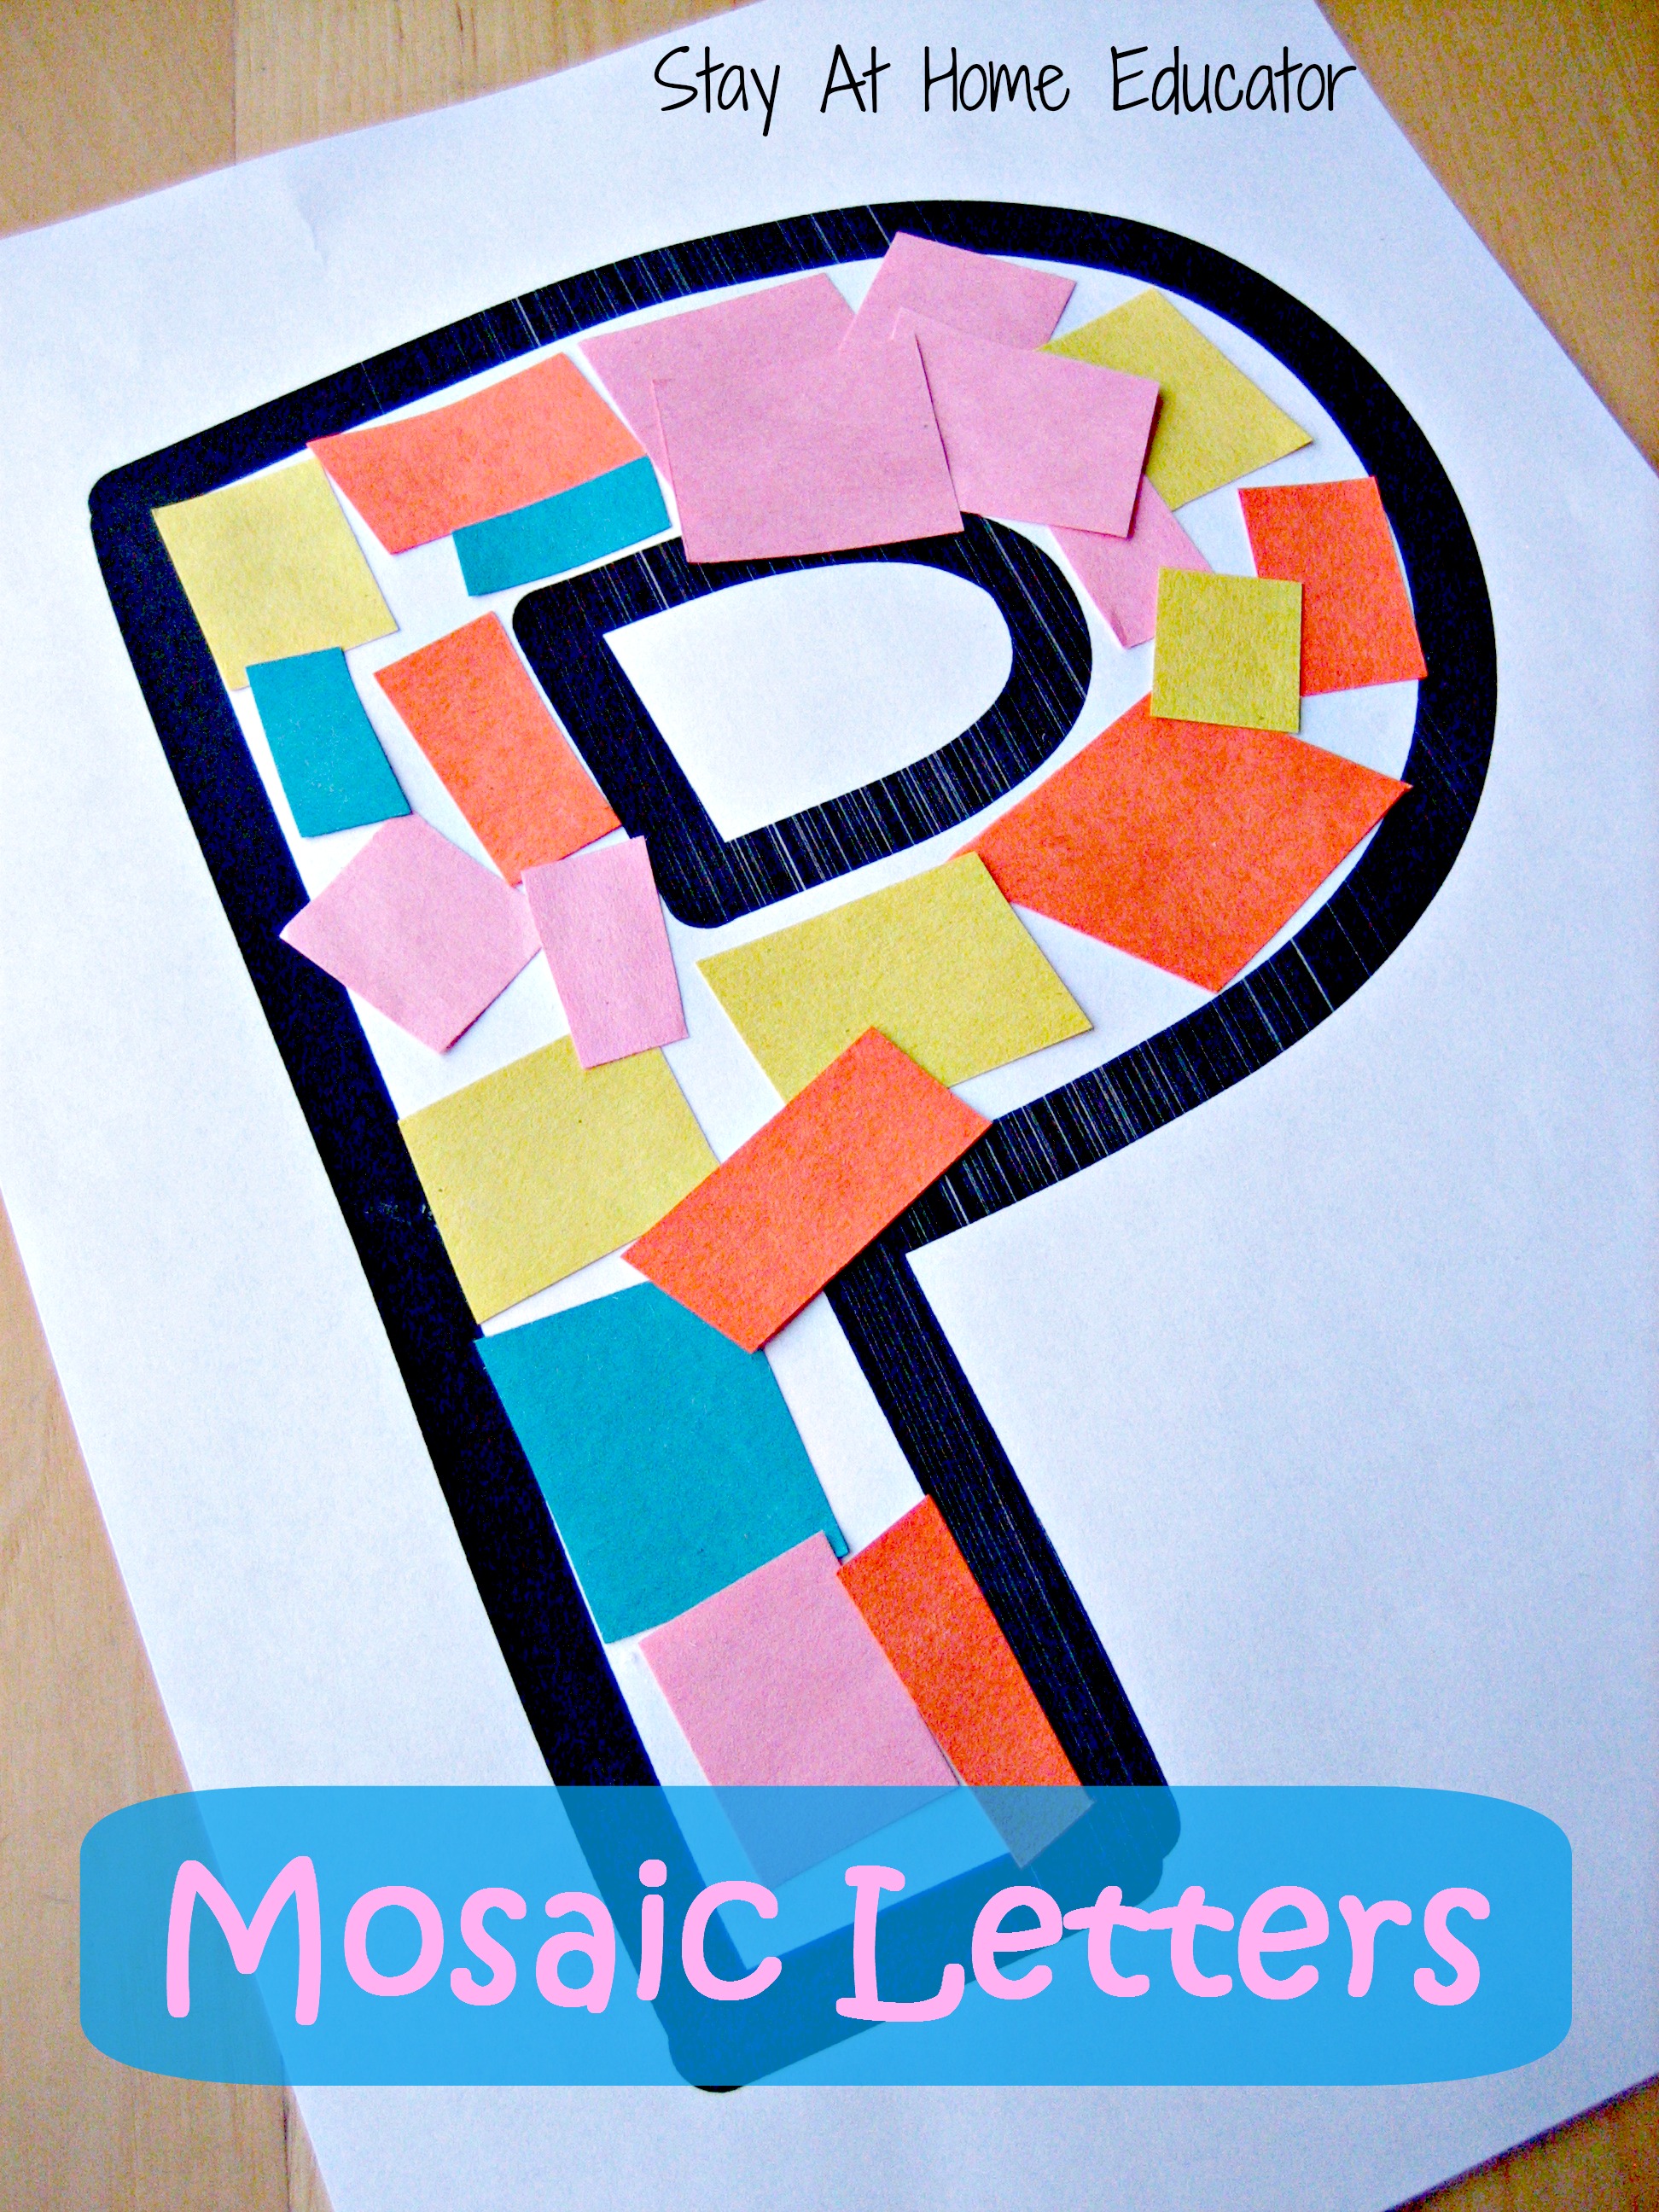 Mosaic Letters Activity for Preschoolers Stay at Hoe Educator